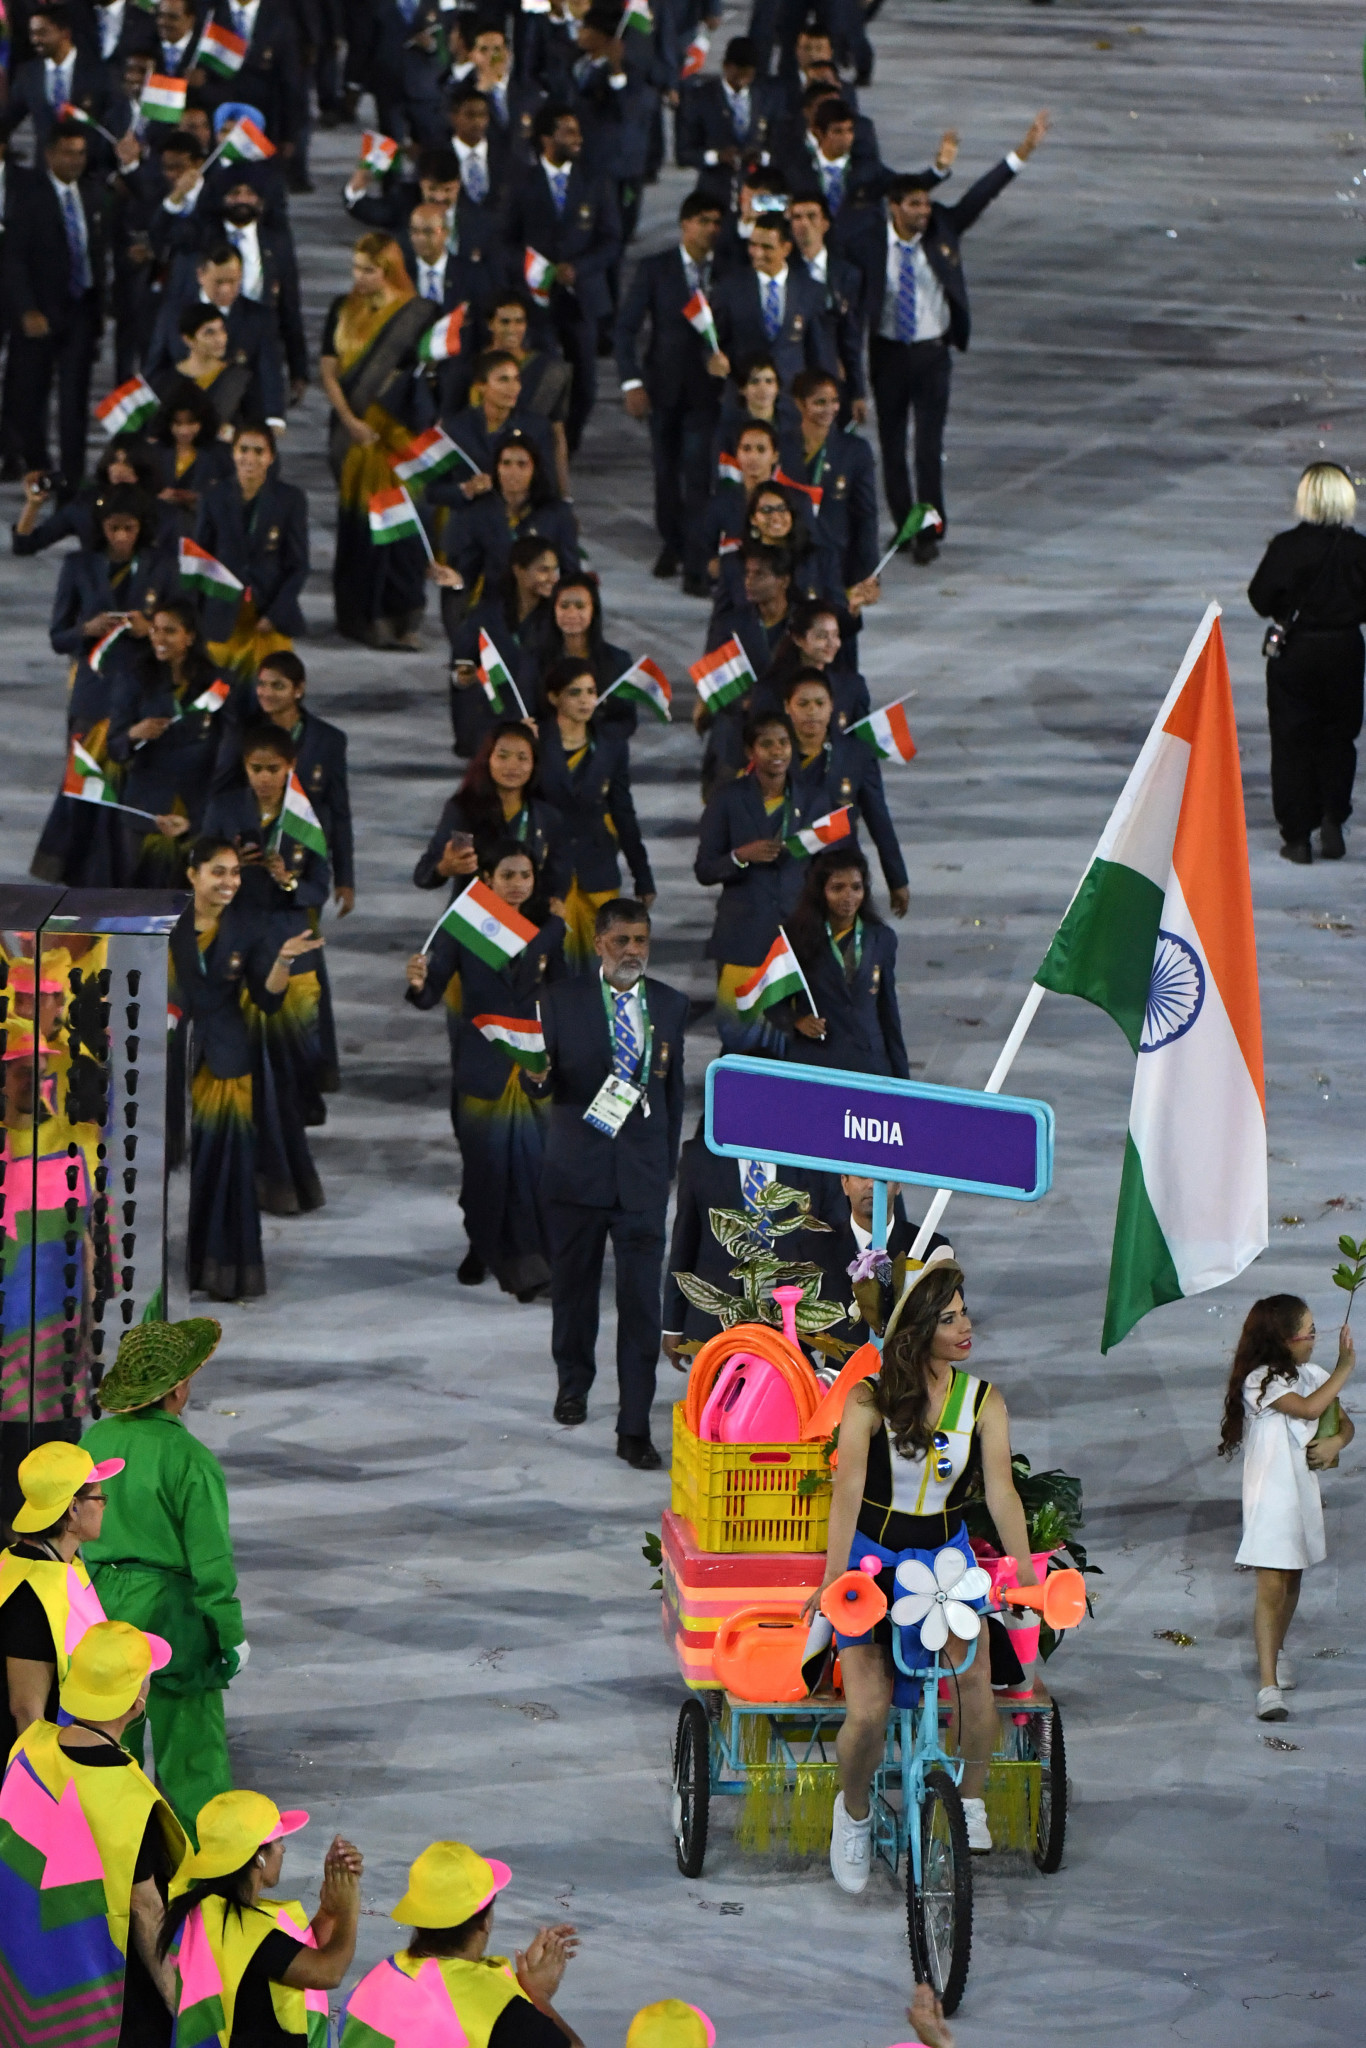 India Sports Minister Kiren Rijiju is confident Indian athletes will perform better at Tokyo 2020 than at previous editions of the Olympic Games ©Getty Images